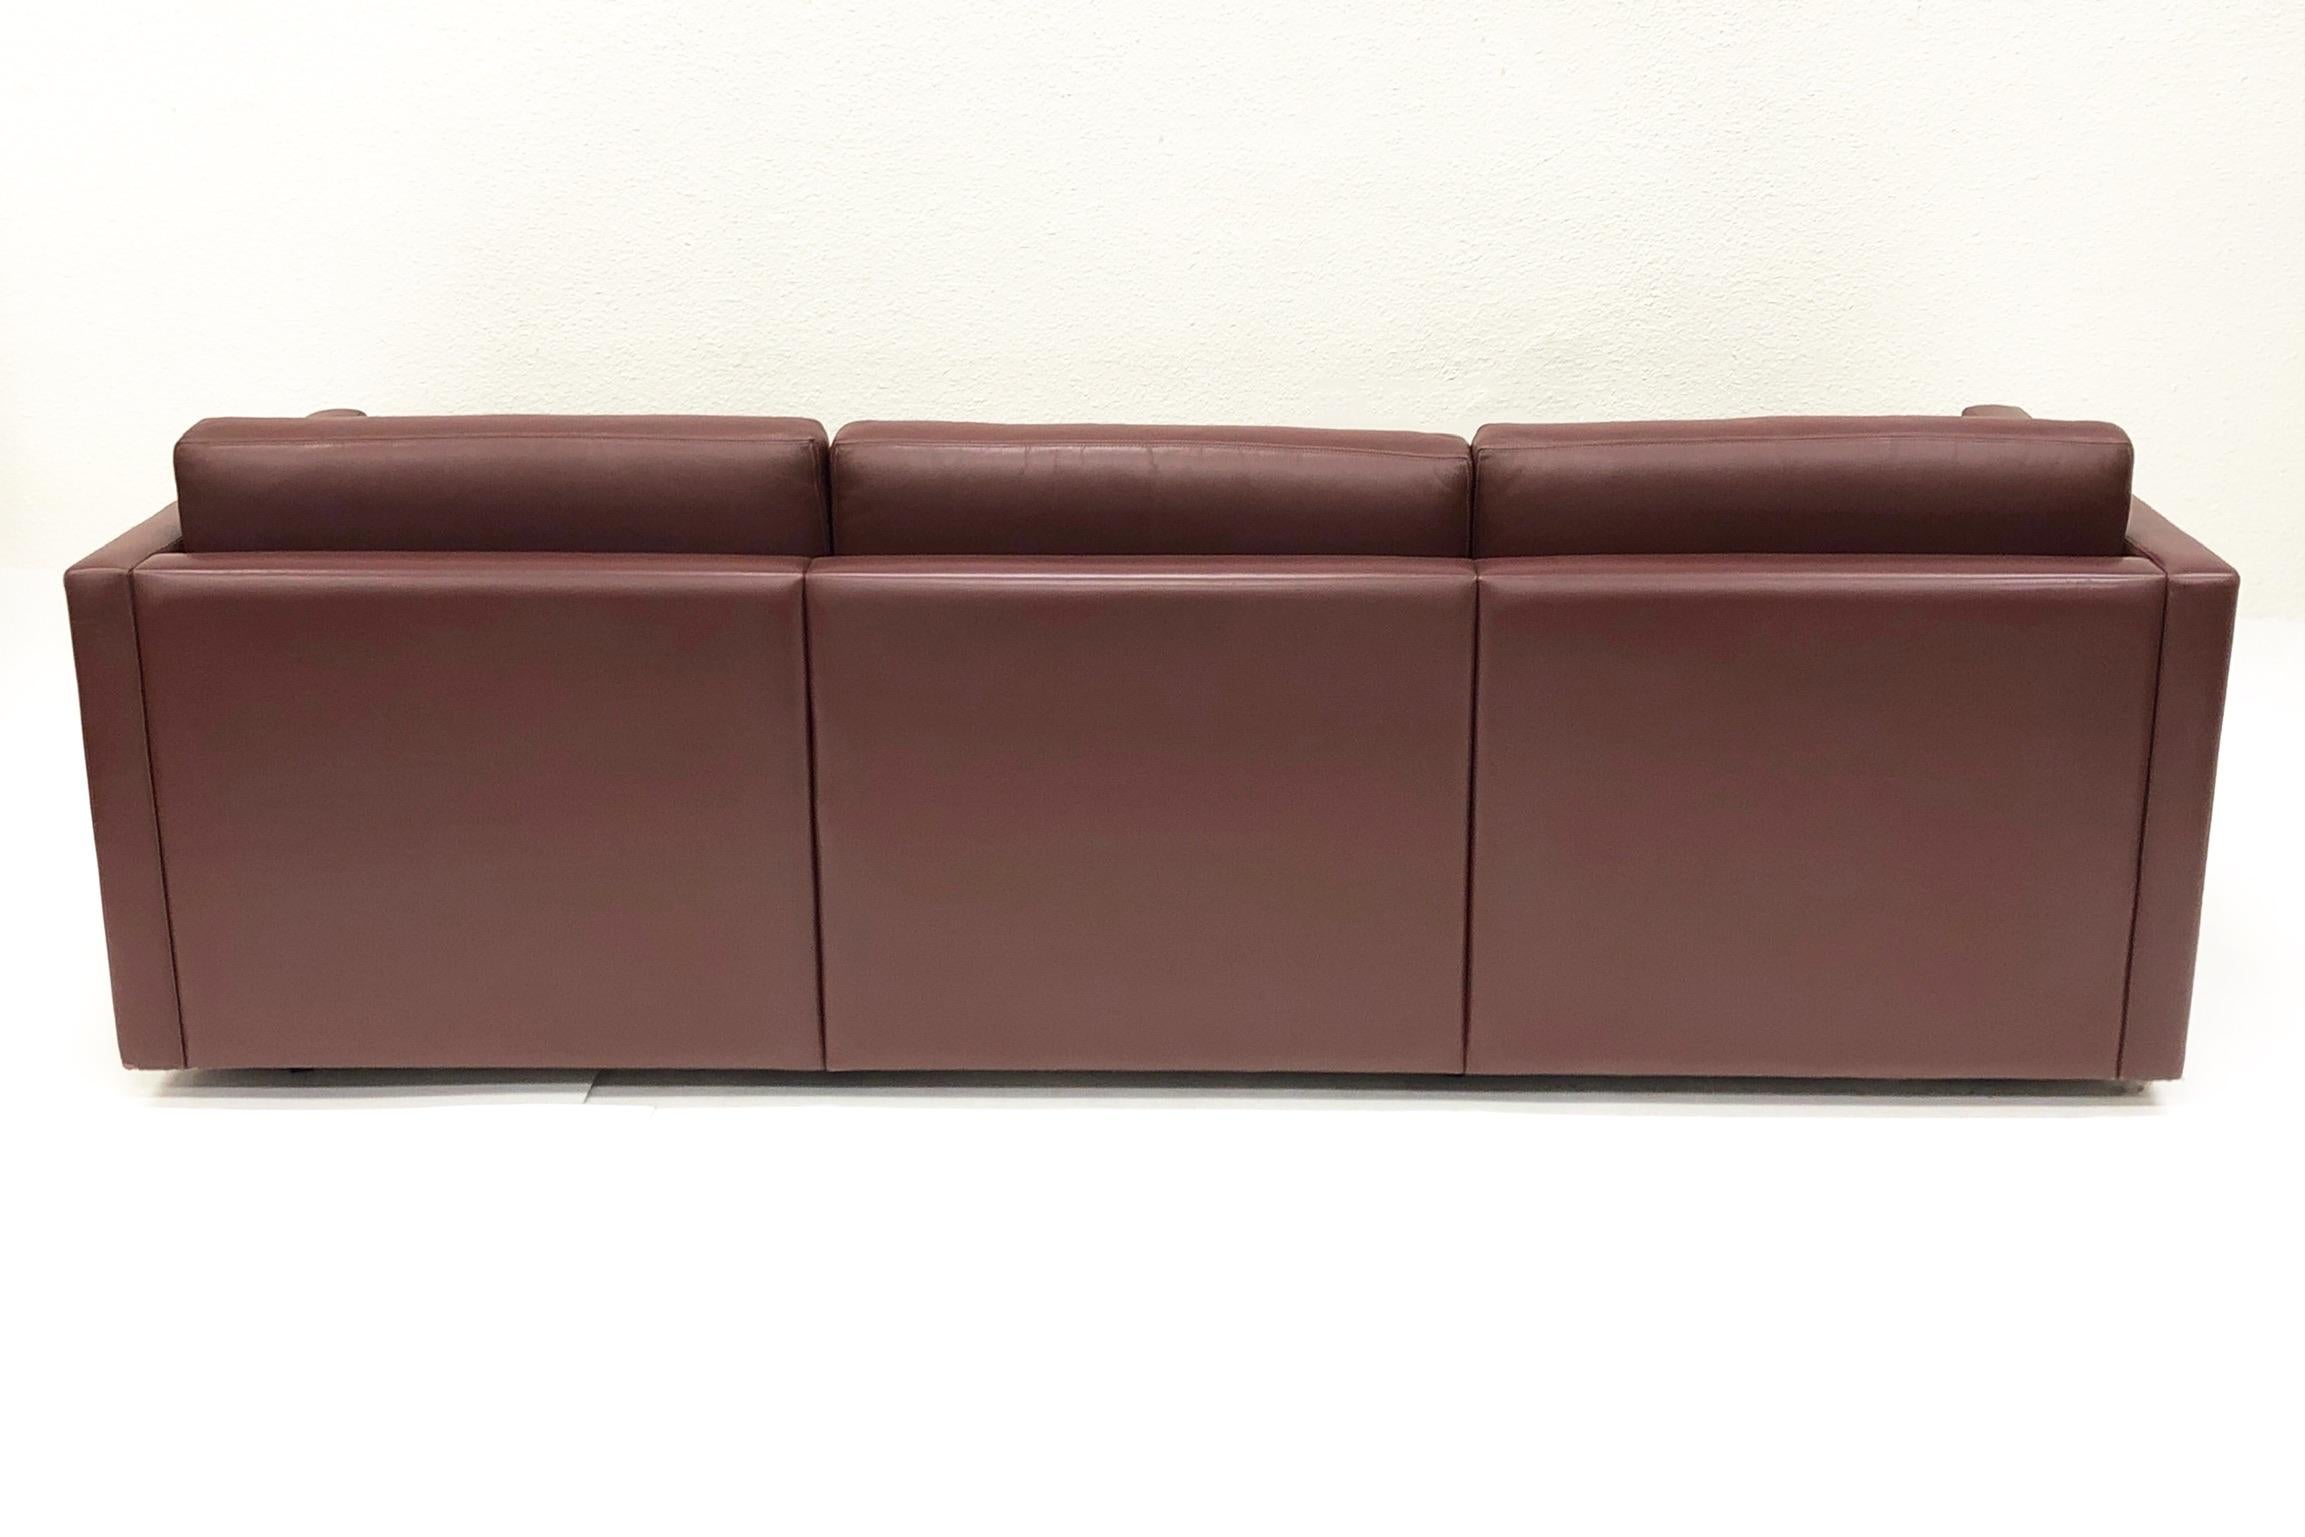 A original three-seat leather sofa design in 1971 by Charles Pfister for Knoll. The original burgundy color Knoll leather has been professionally cleaned and condition.
Overall dimensions: 86” wide, 33” deep, 29” high, 16” seat, 24” arm height.